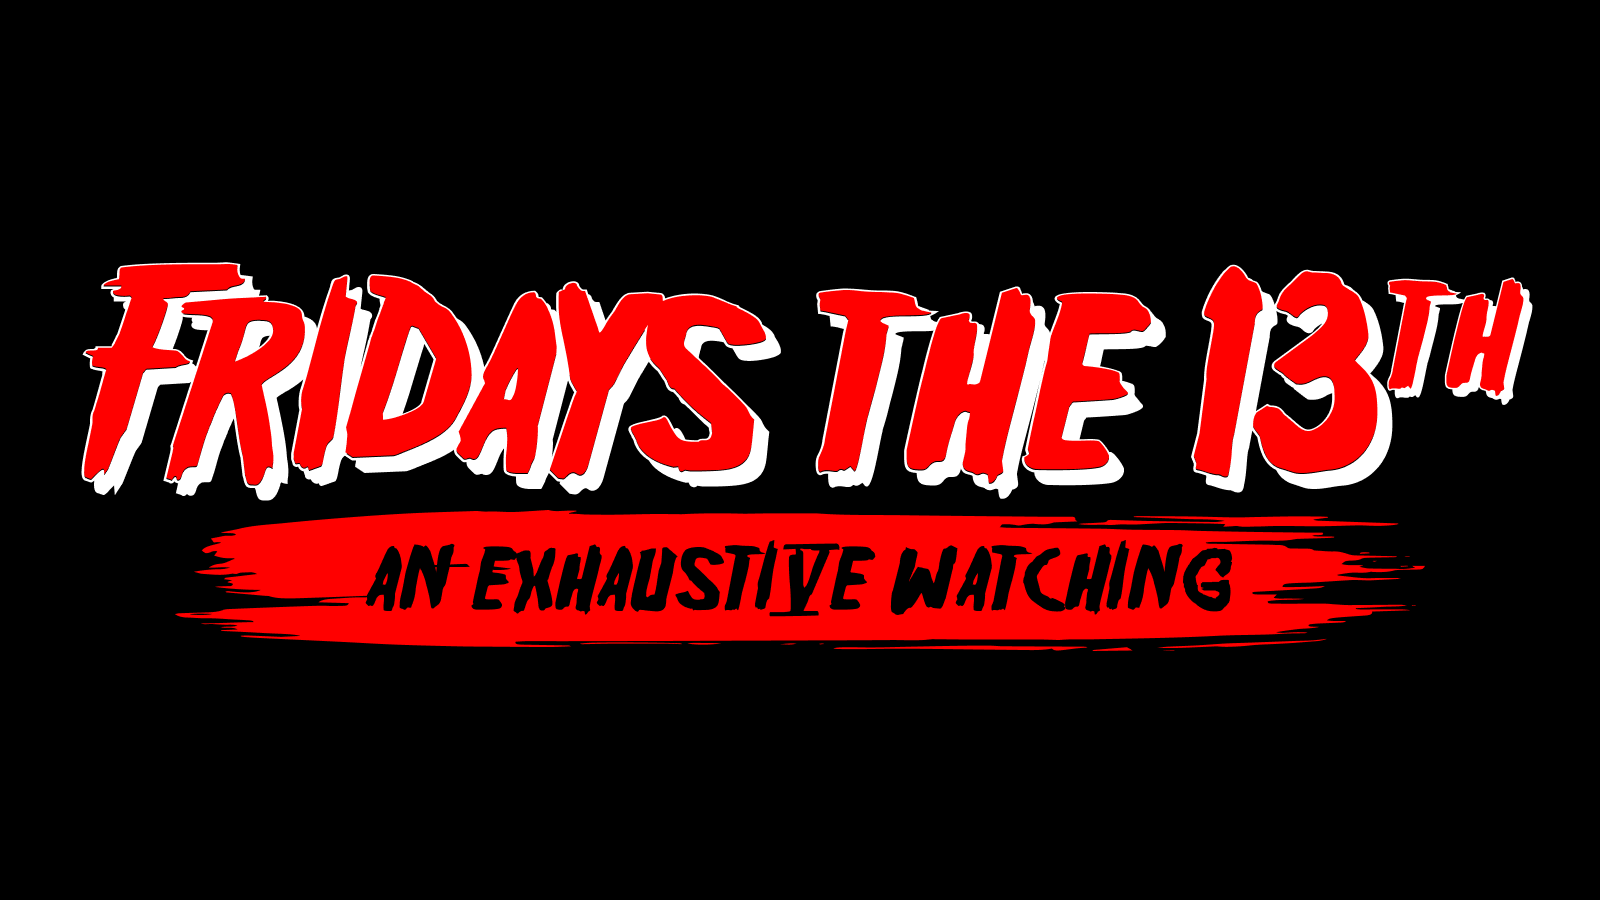 Fridays the 13th: An Exhaustive Watching